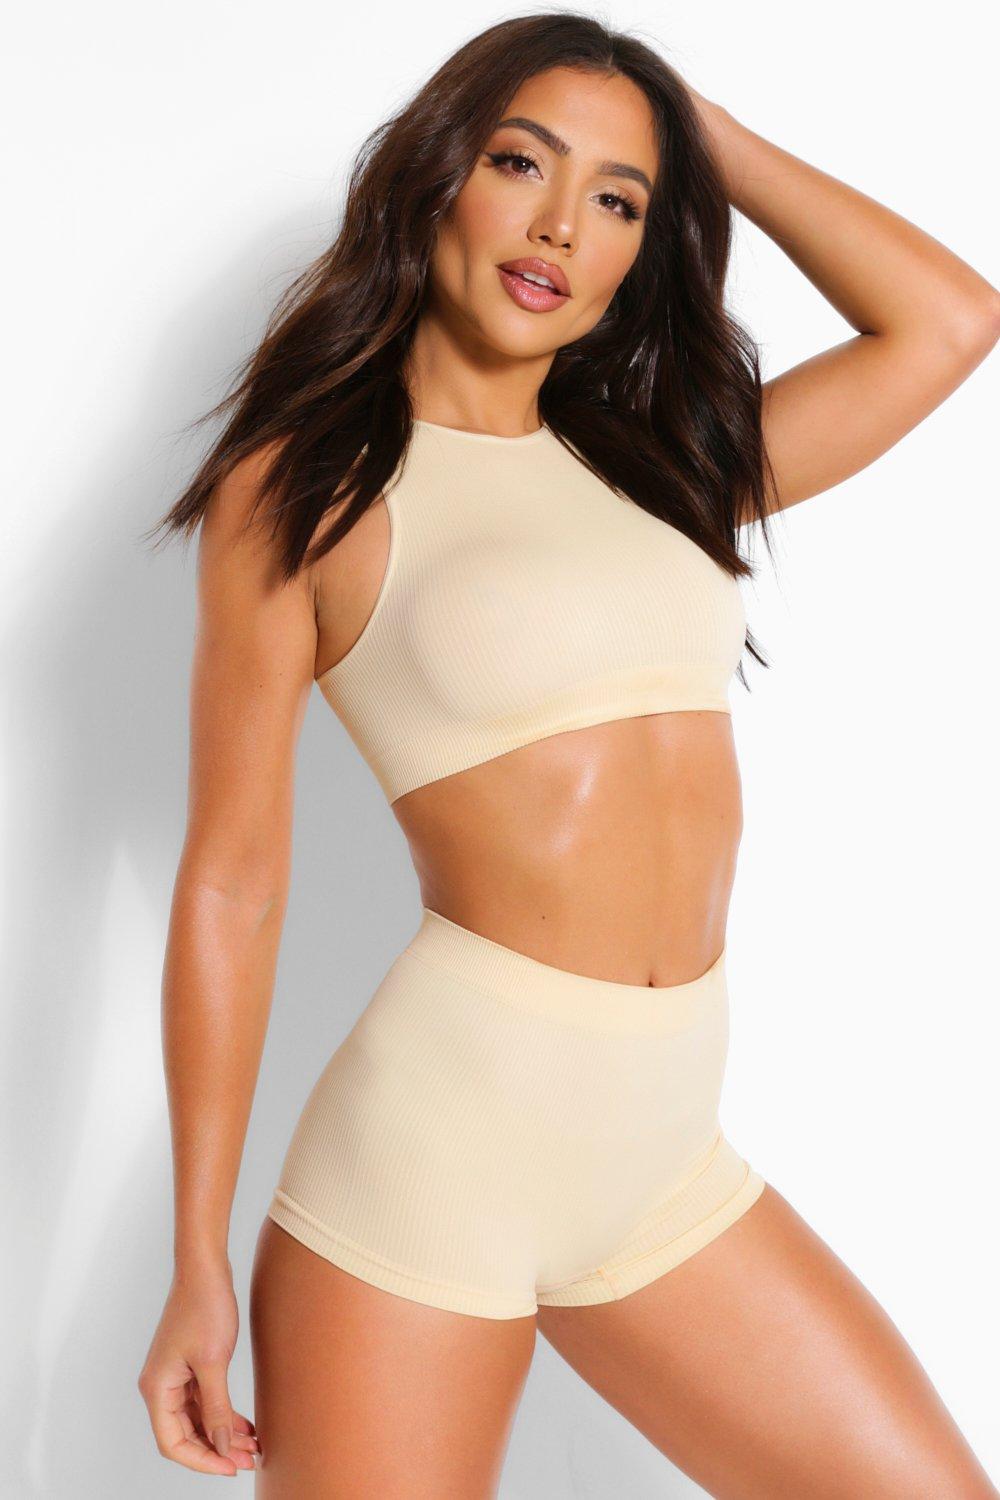 Ribbed Seamless High-Neck Cropped Tank Top/Bra